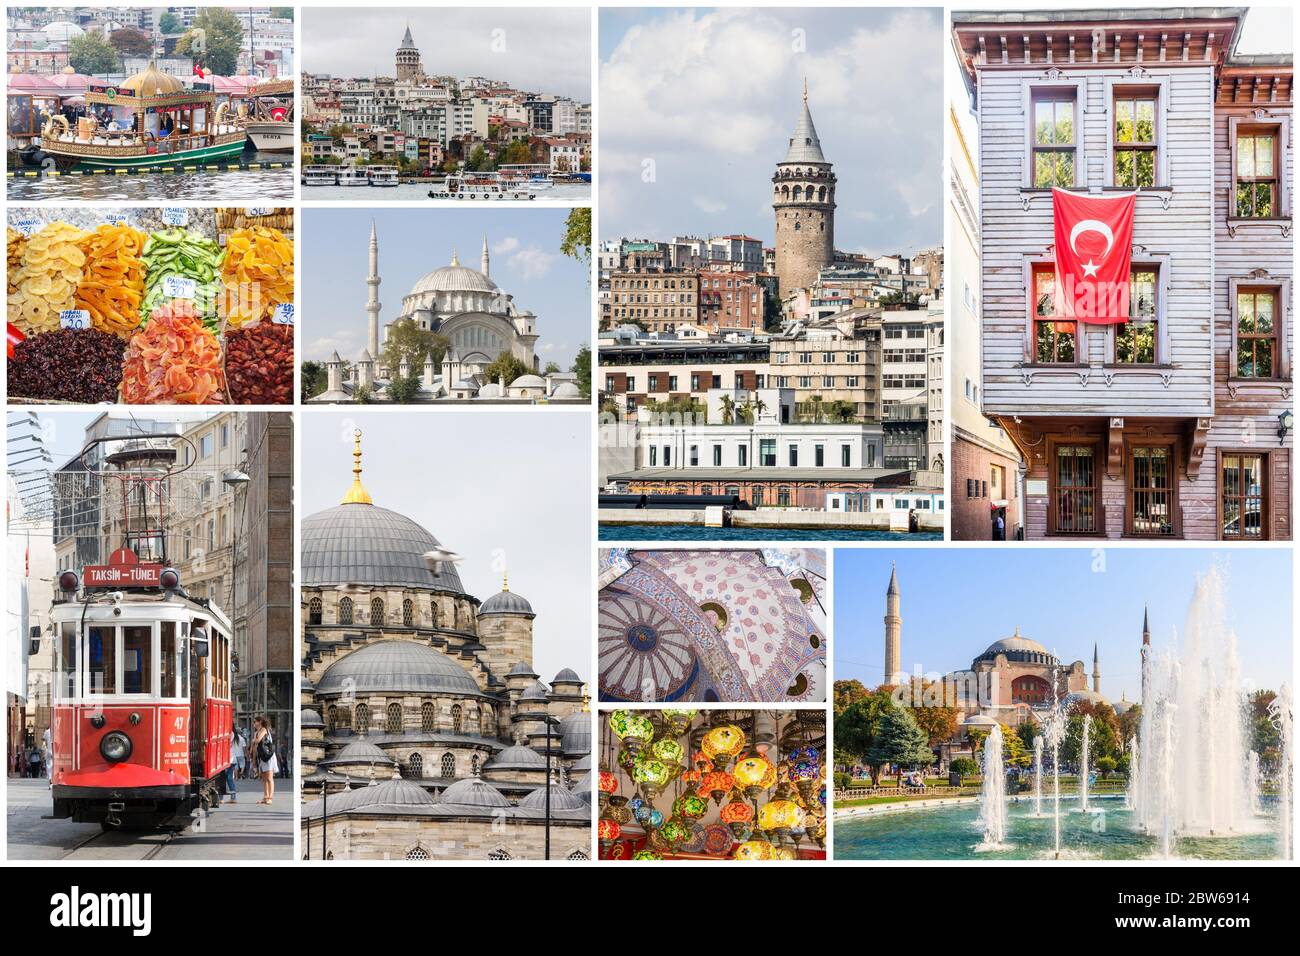 Travel images collage of Istanbul, Turkey Stock Photo